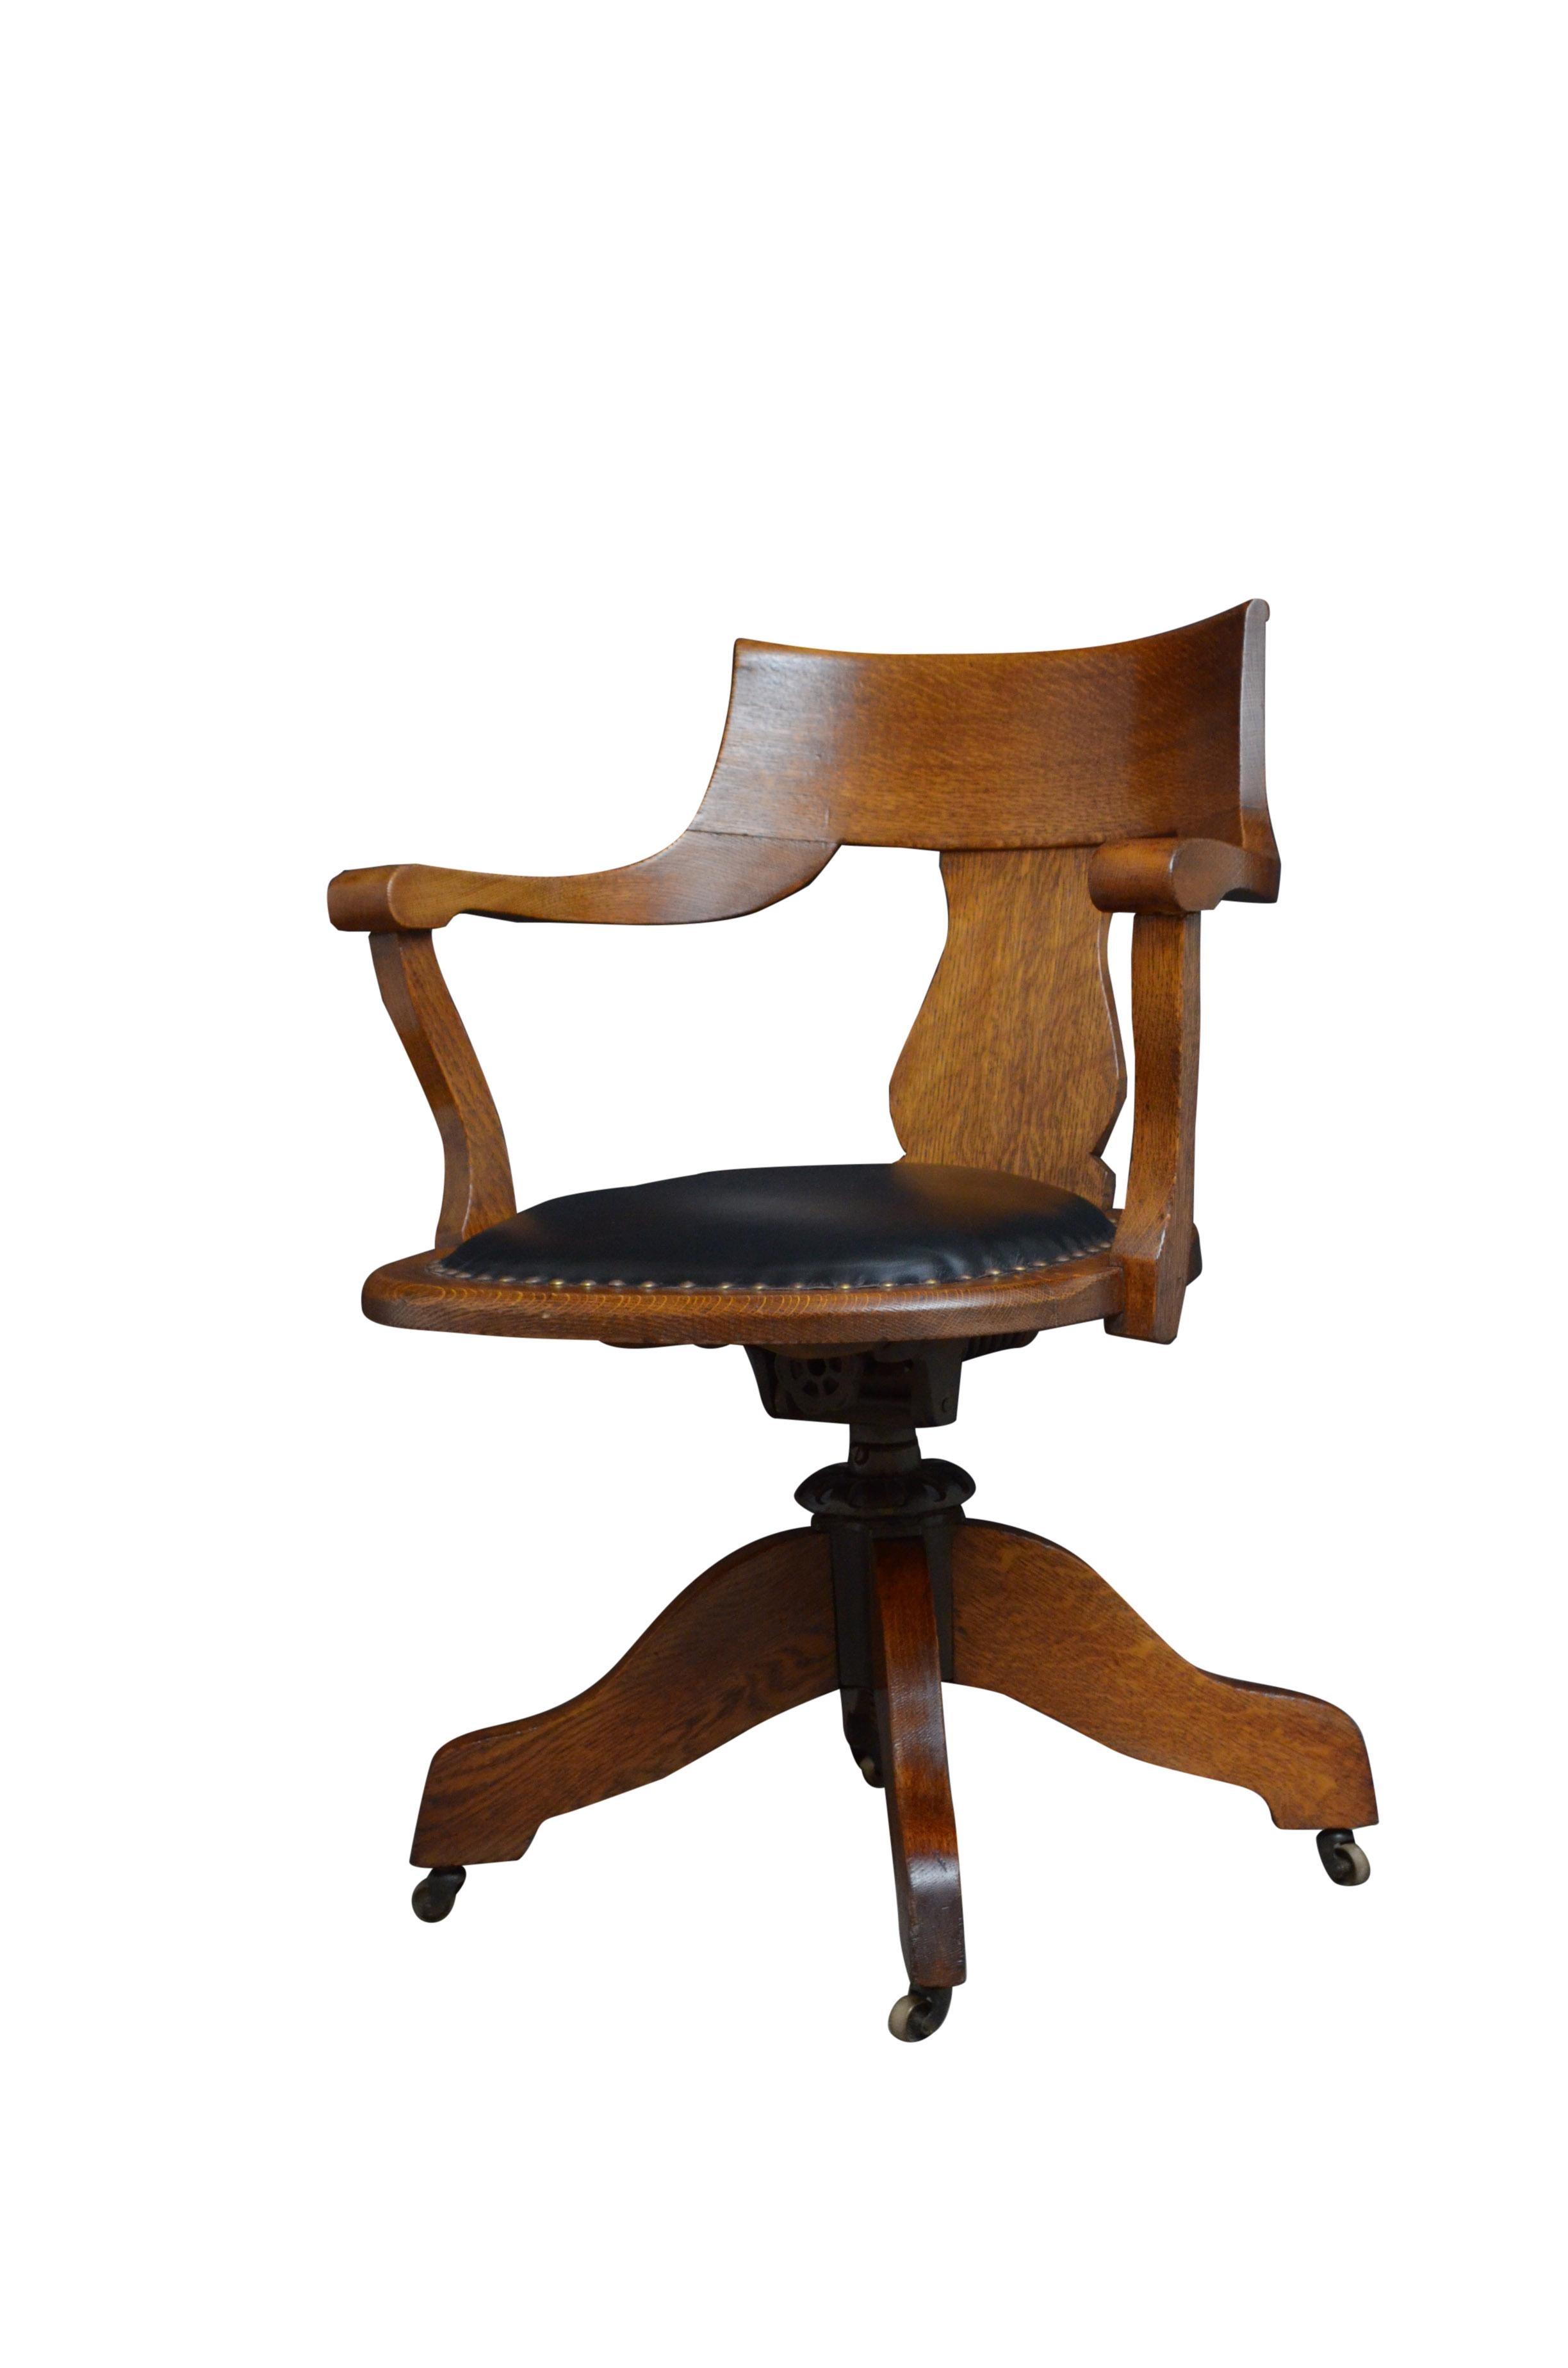 K0513 Early XXth century revolving and tilting desk chair in oak, having shaped top rails with shaped splat below, open arms and black leather seat, raised on revolving mechanism and tilting with four shaped legs terminating in original castors. The